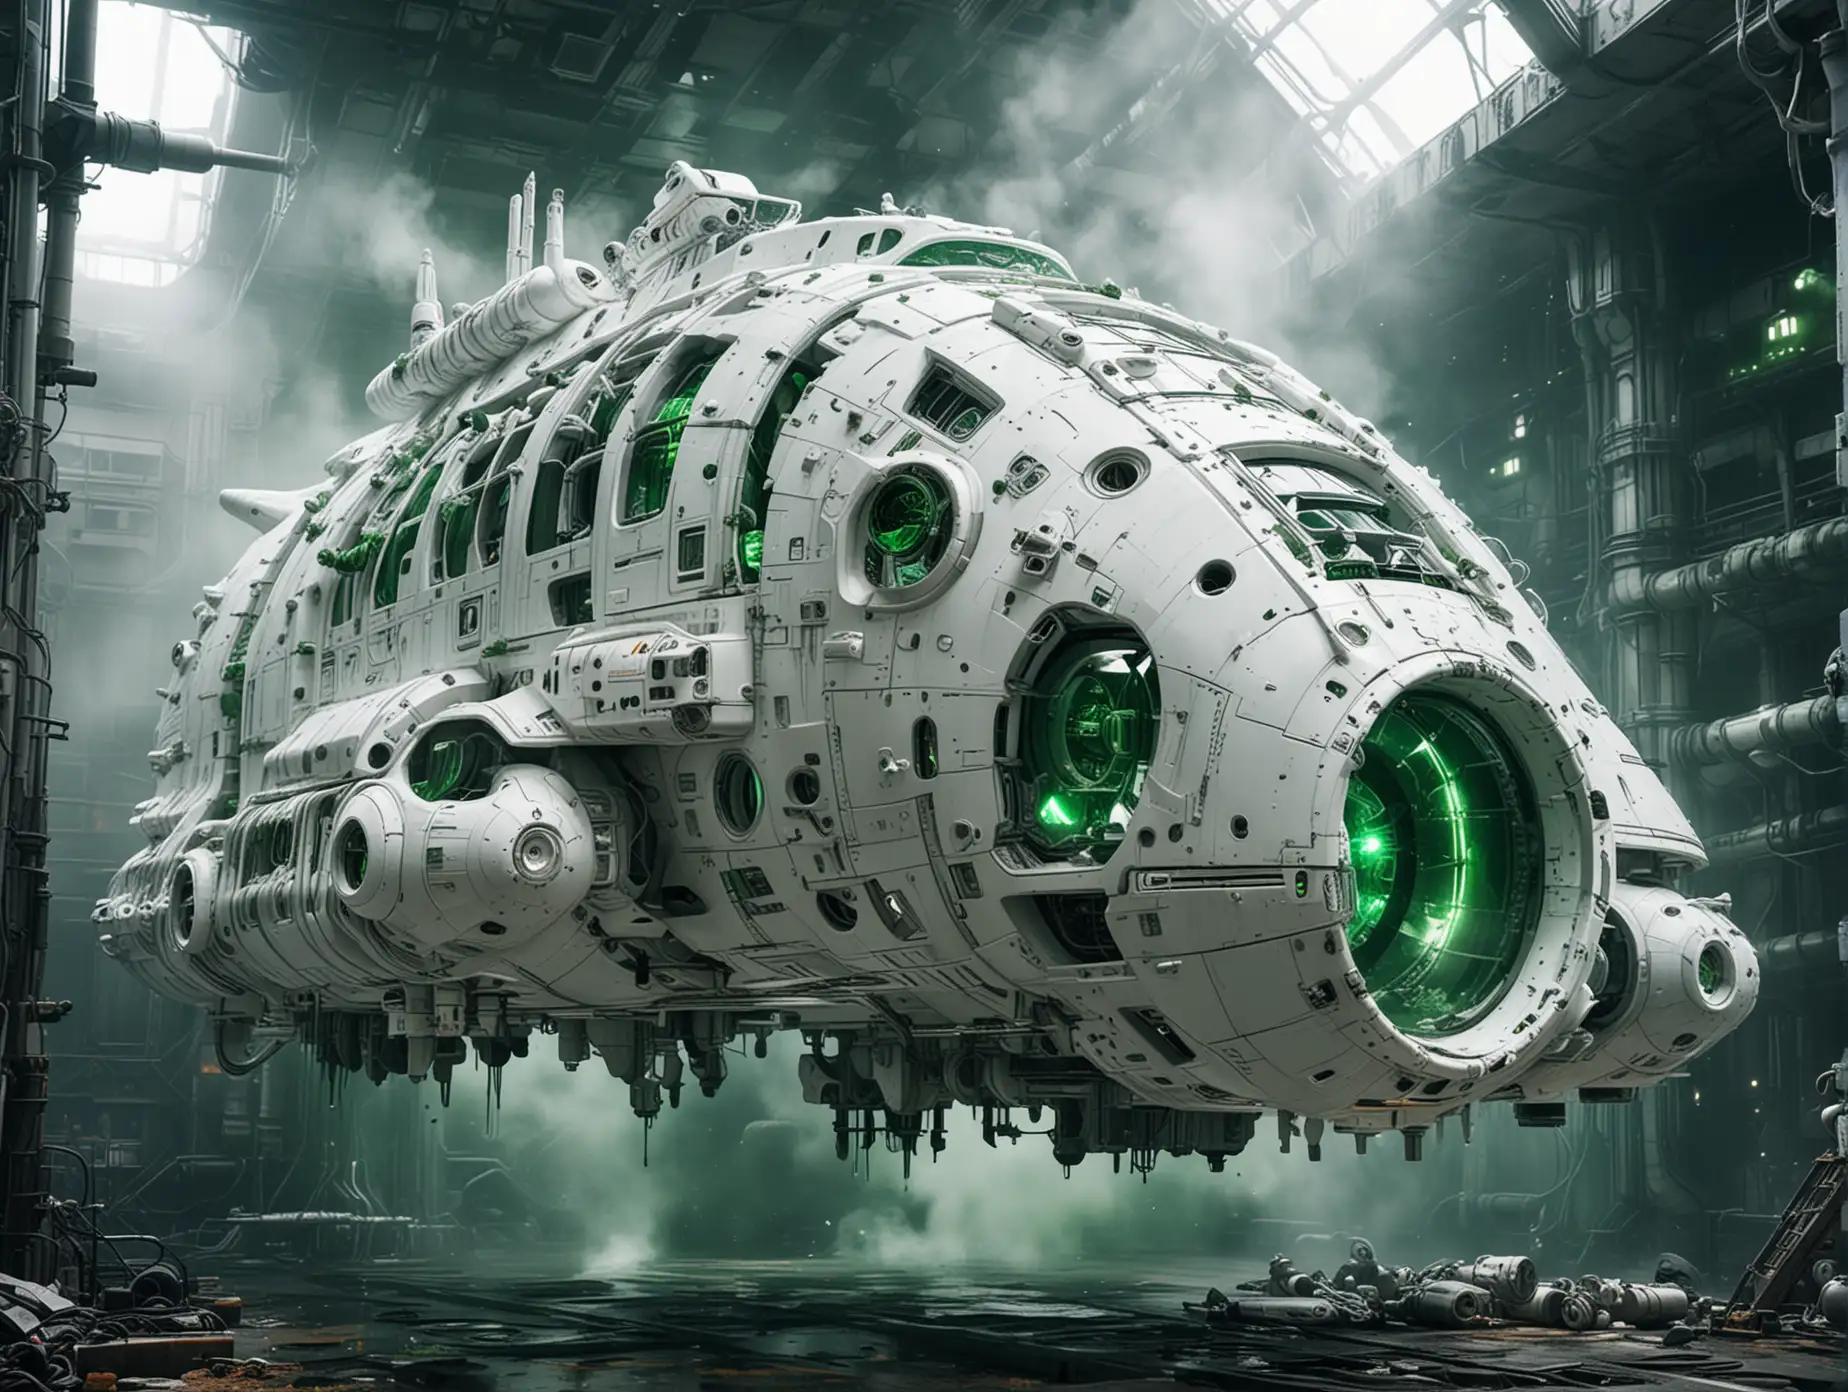 Futuristic-White-Spaceship-with-Leaking-Green-Pipes-in-Space